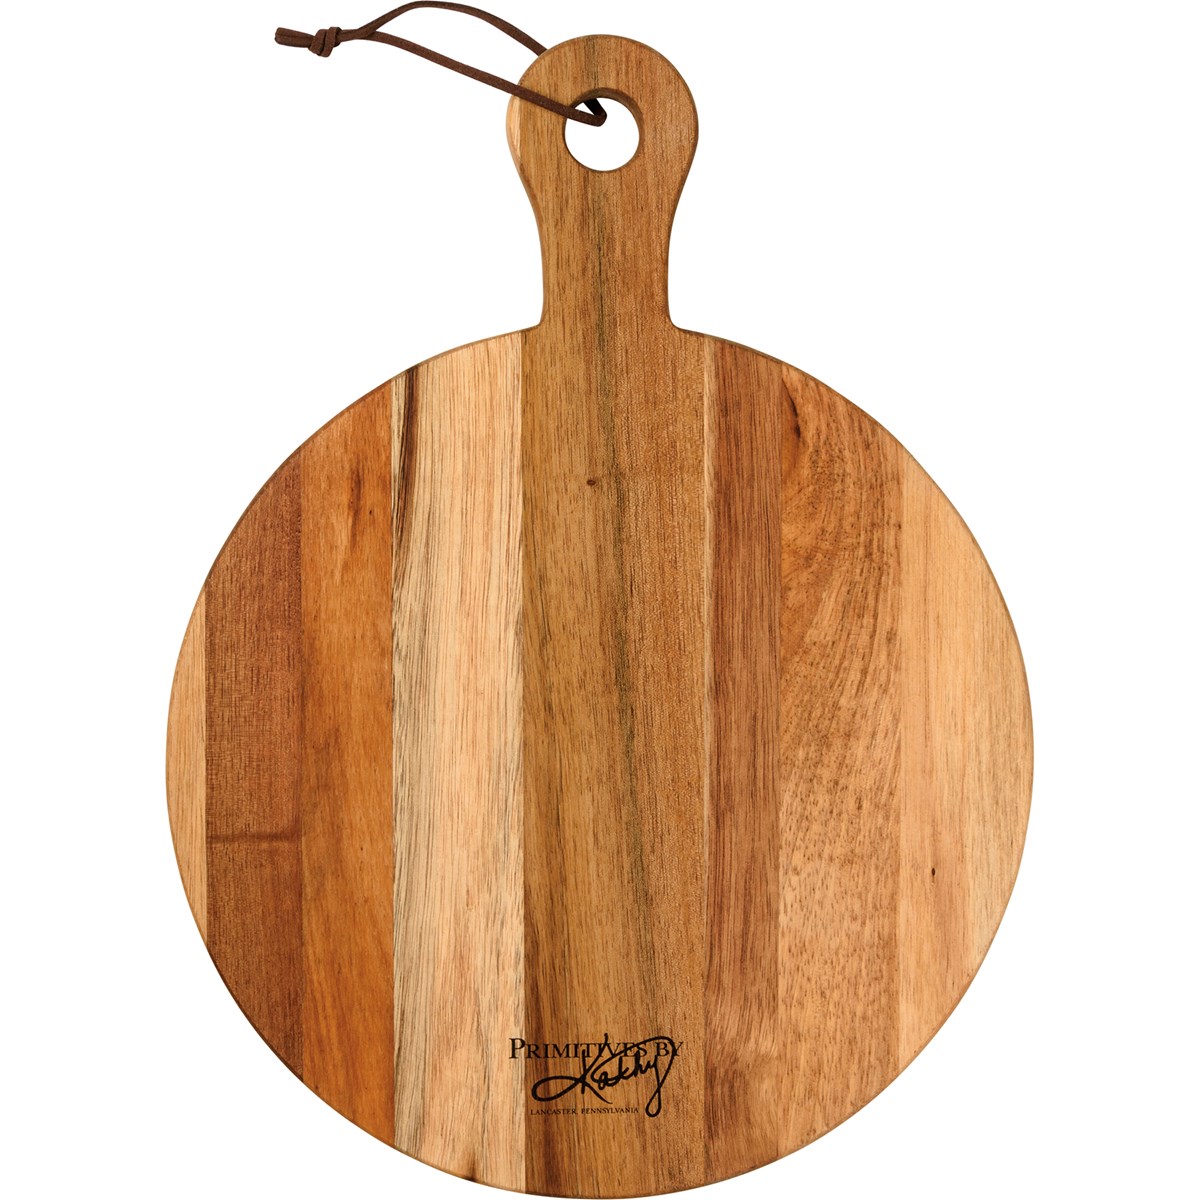 Nana's Kitchen Food Made With Love Cutting Board - Wood, Leather